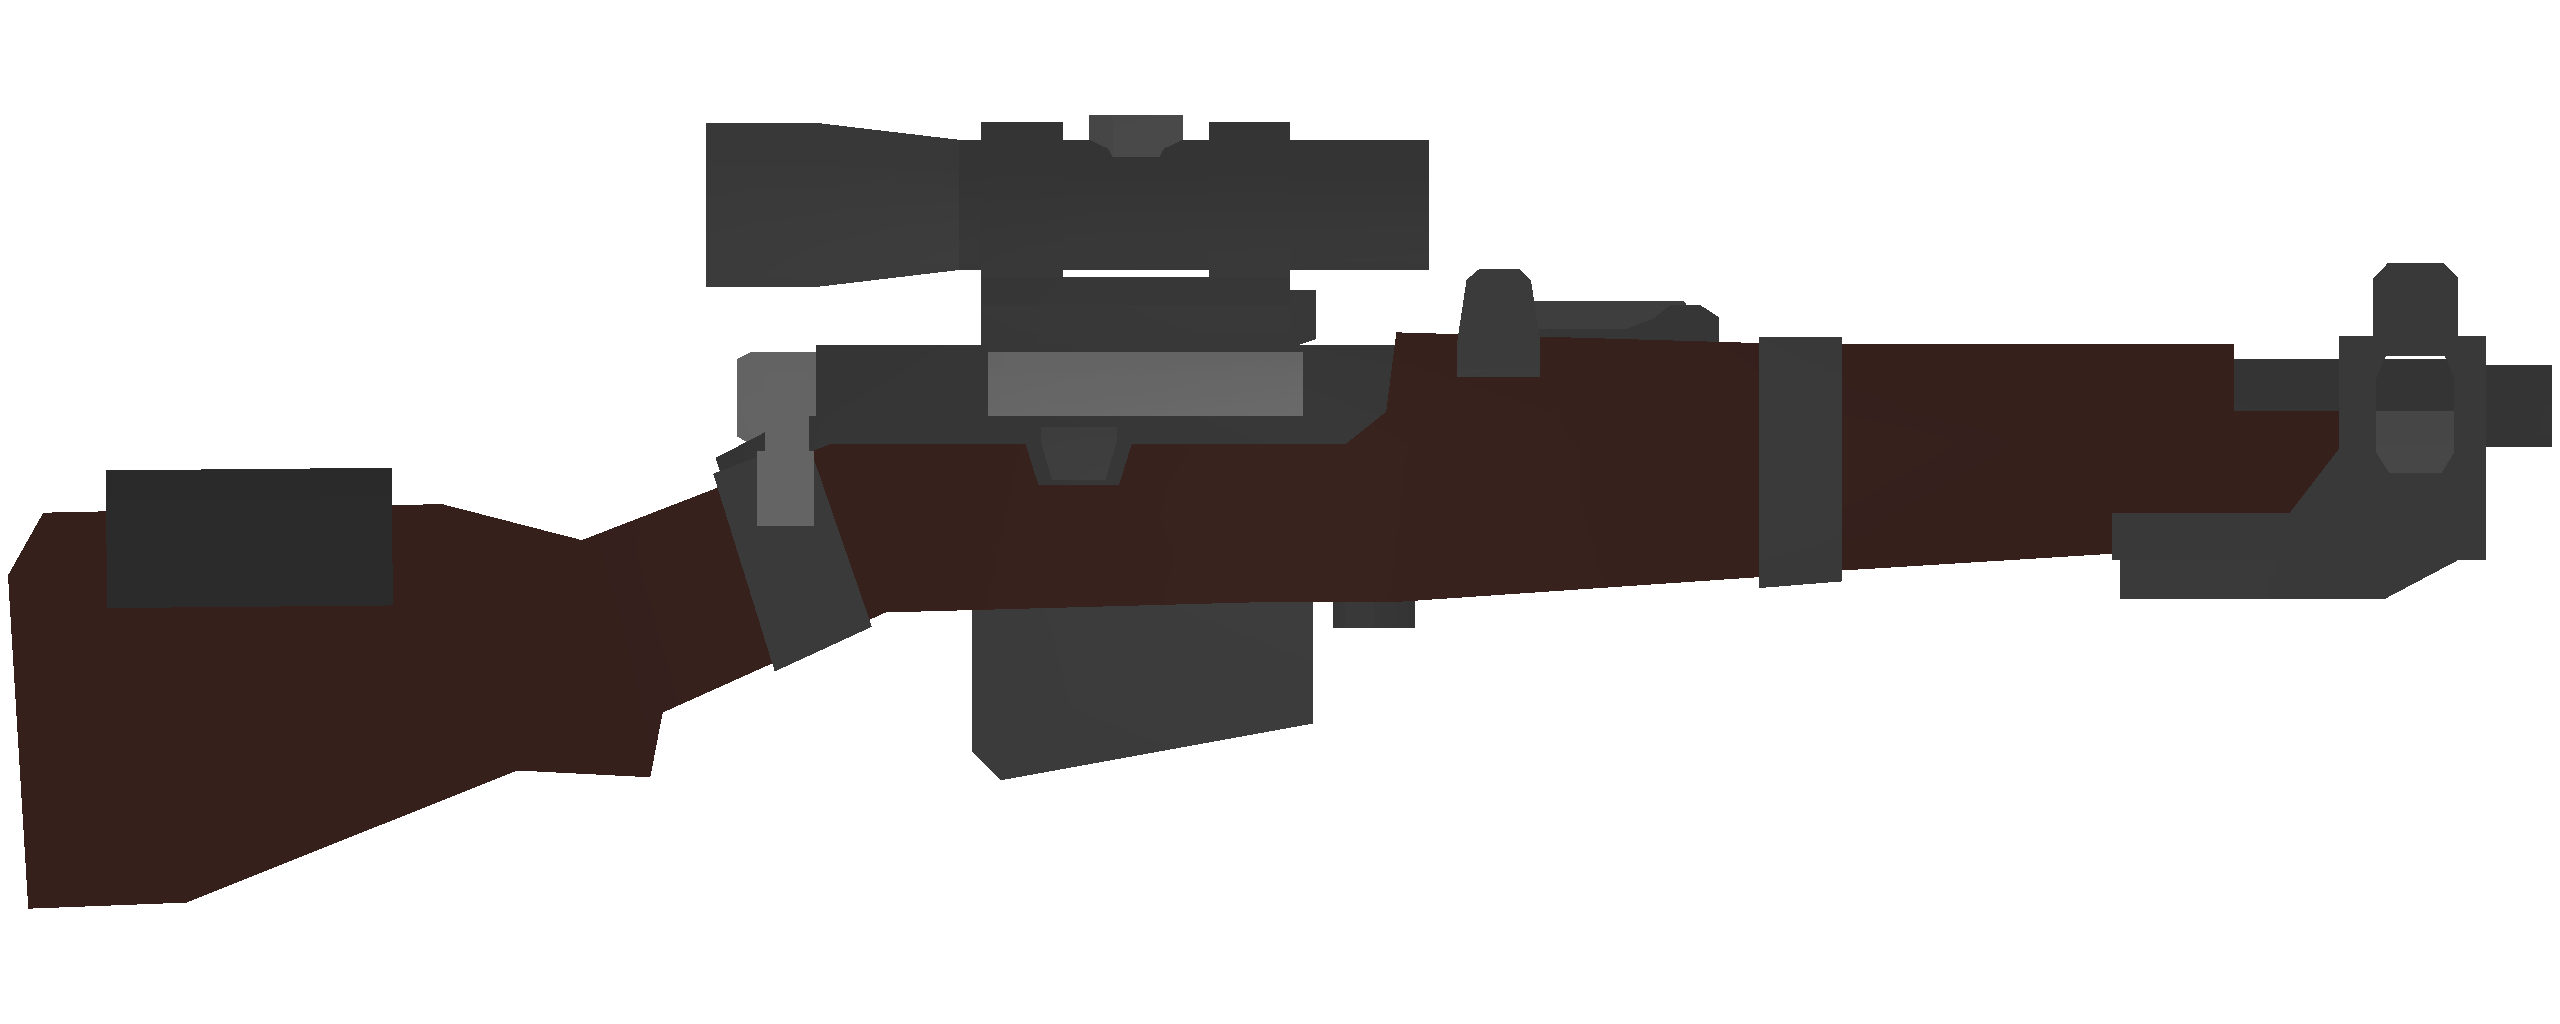 Unturned All ID lists for Magazines and Attachments - Kuwait Items Redux - Sniper Rifles - 1698784